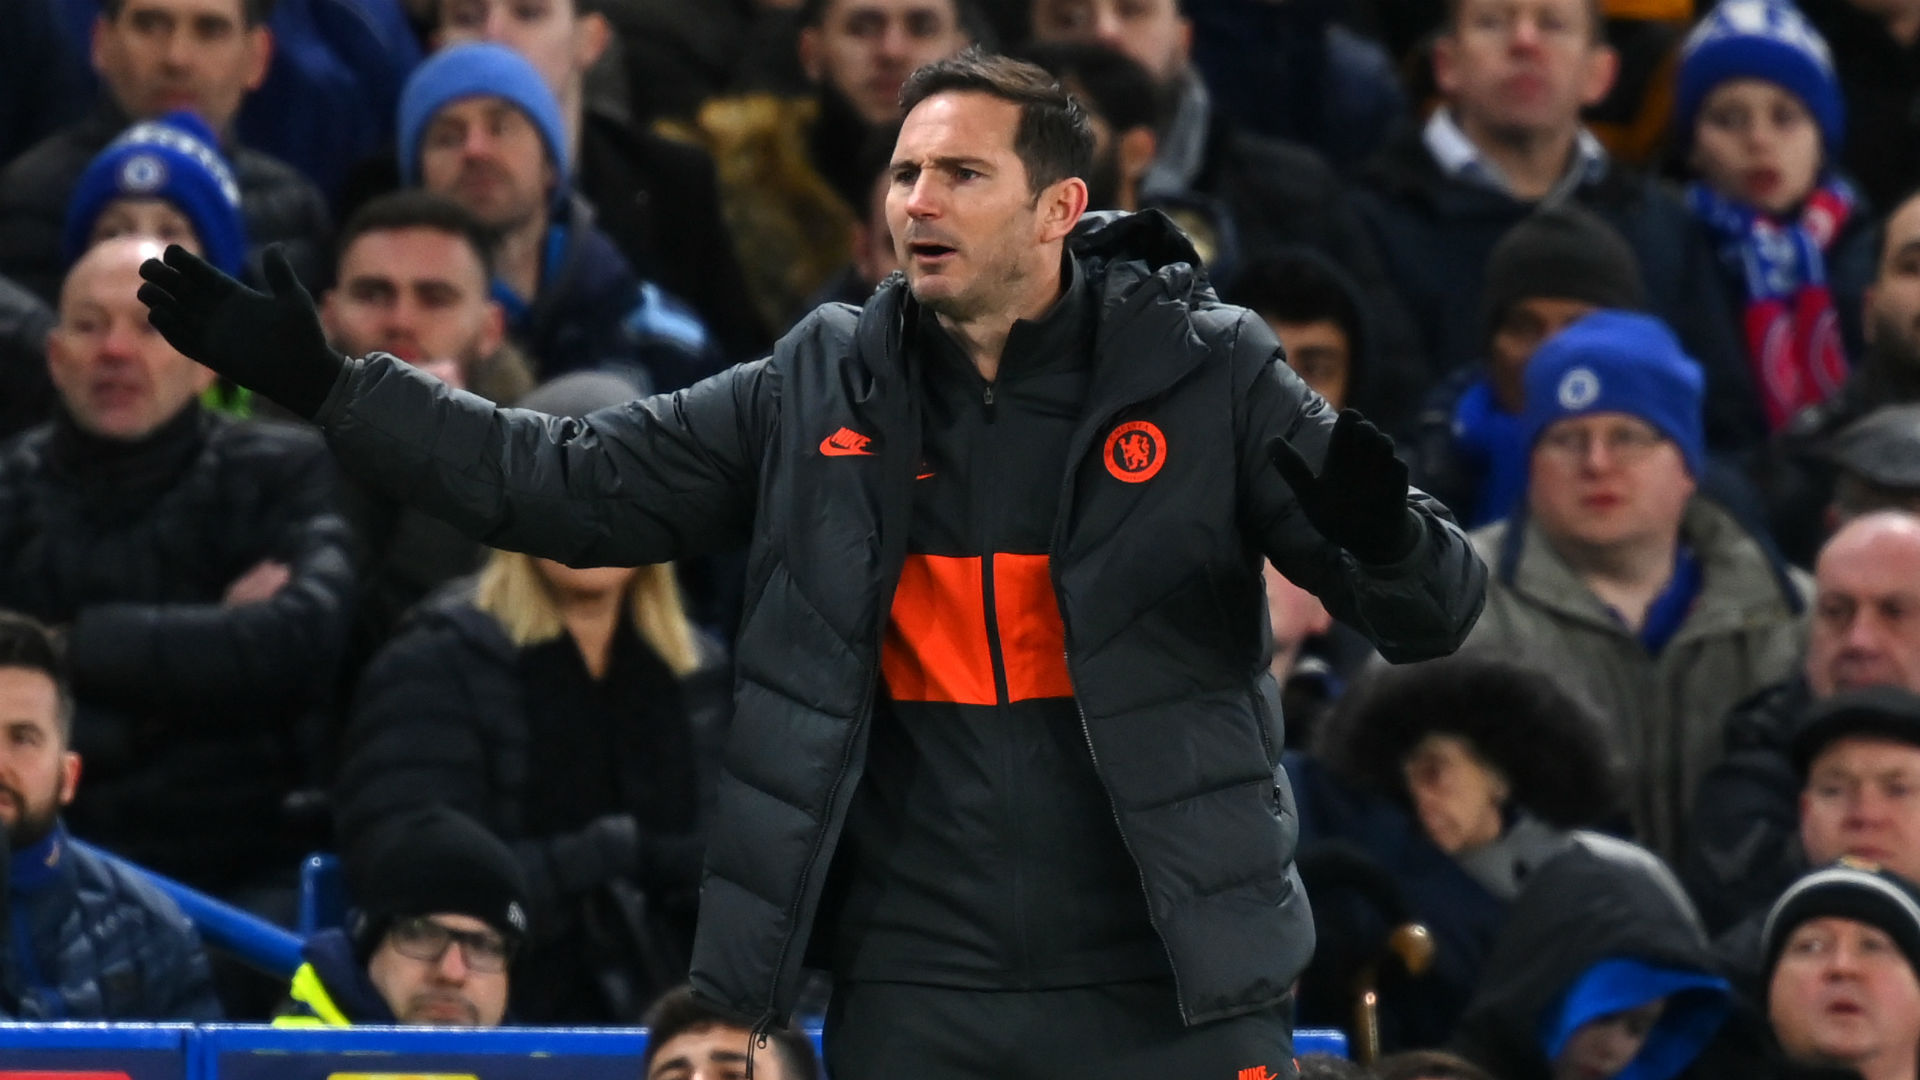 Chelsea were hammered 3-0 by Bayern Munich in midweek and boss Frank Lampard is hoping for a reaction at Bournemouth on Saturday.